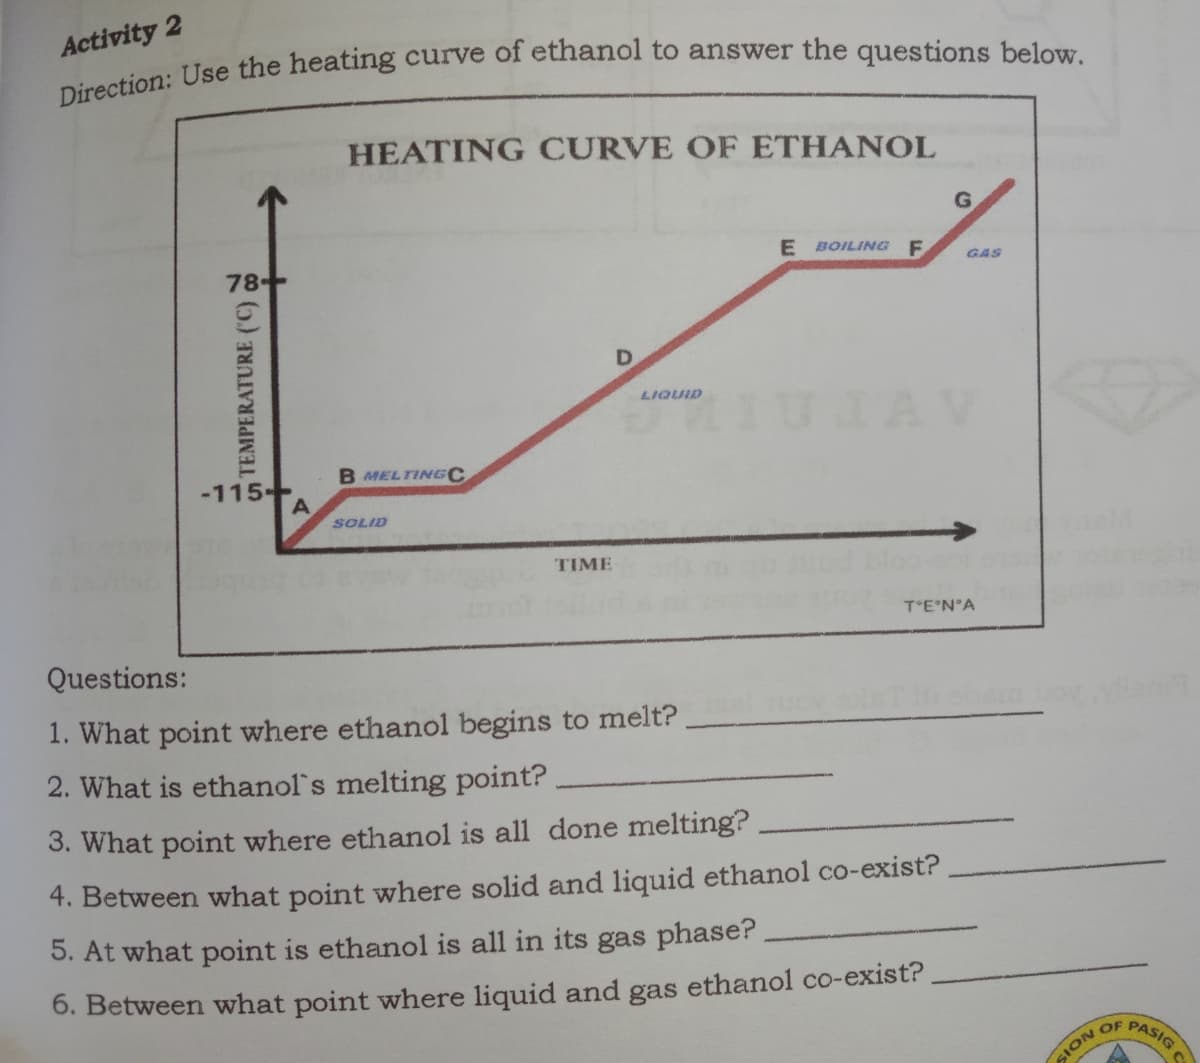 Activity 2
HEATING CURVE OF ETHANOL
E BOILING F
GAS
AV
LIQUID
B MELTINGC
-115--
SOLID
TIME
T'E'N°A
Questions:
1. What point where ethanol begins to melt?
2. What is ethanol's melting point?
3. What point where ethanol is all done melting?
4. Between what point where solid and liquid ethanol co-exist?
5. At what point is ethanol is all in its gas phase?
6. Between what point where liquid and gas ethanol co-exist?
NOIS
PASIGC
OF
S TEMPERATURE (C) 8
